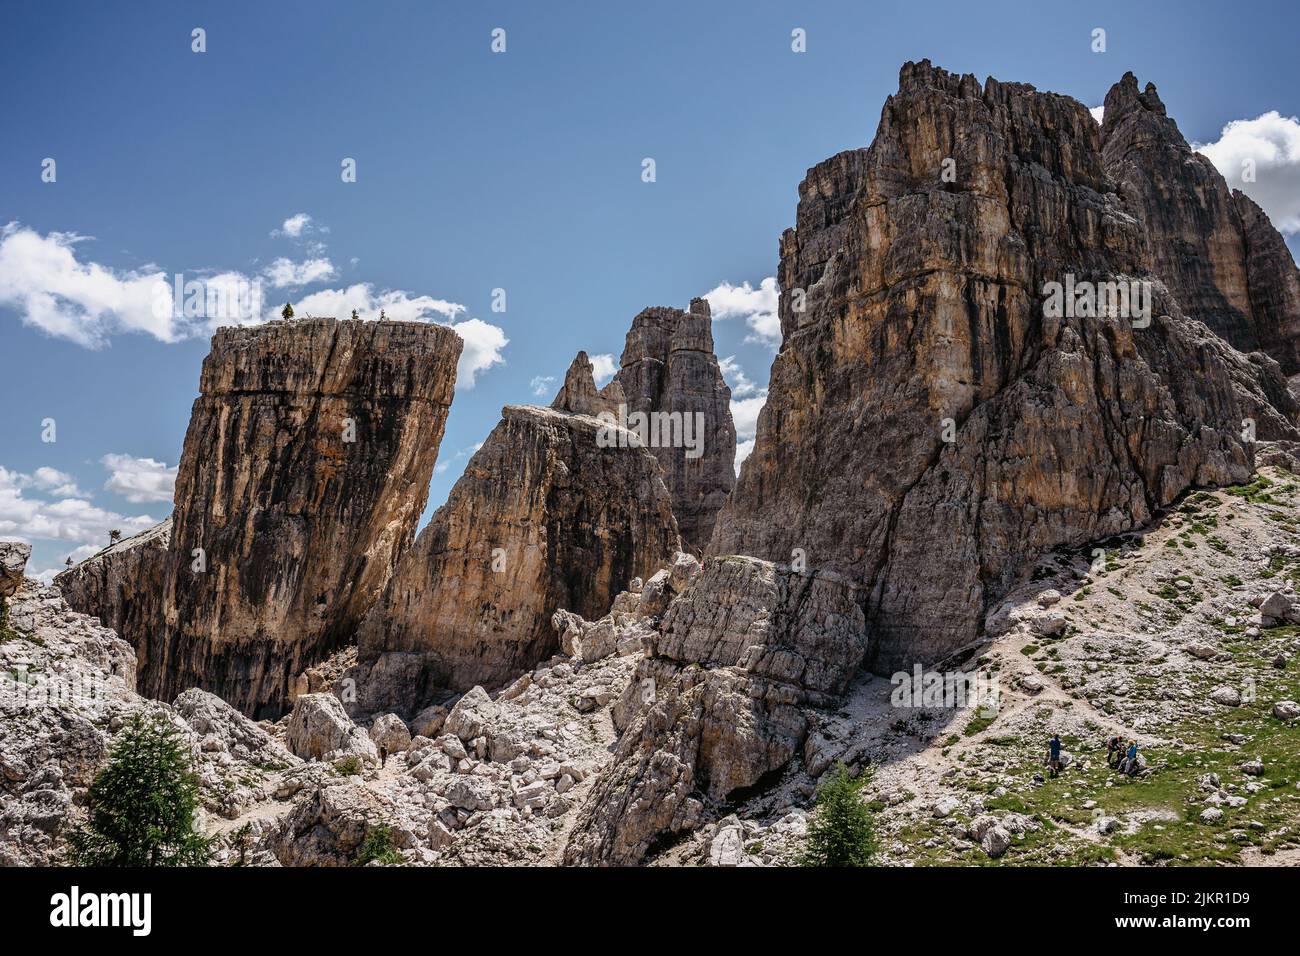 Climbing in Cinque Torri,Dolomites,Italy.Five towers and rock formations close to Cortina d'Ampezzo attract many climbers.Picturesque Dolomite Alps Stock Photo